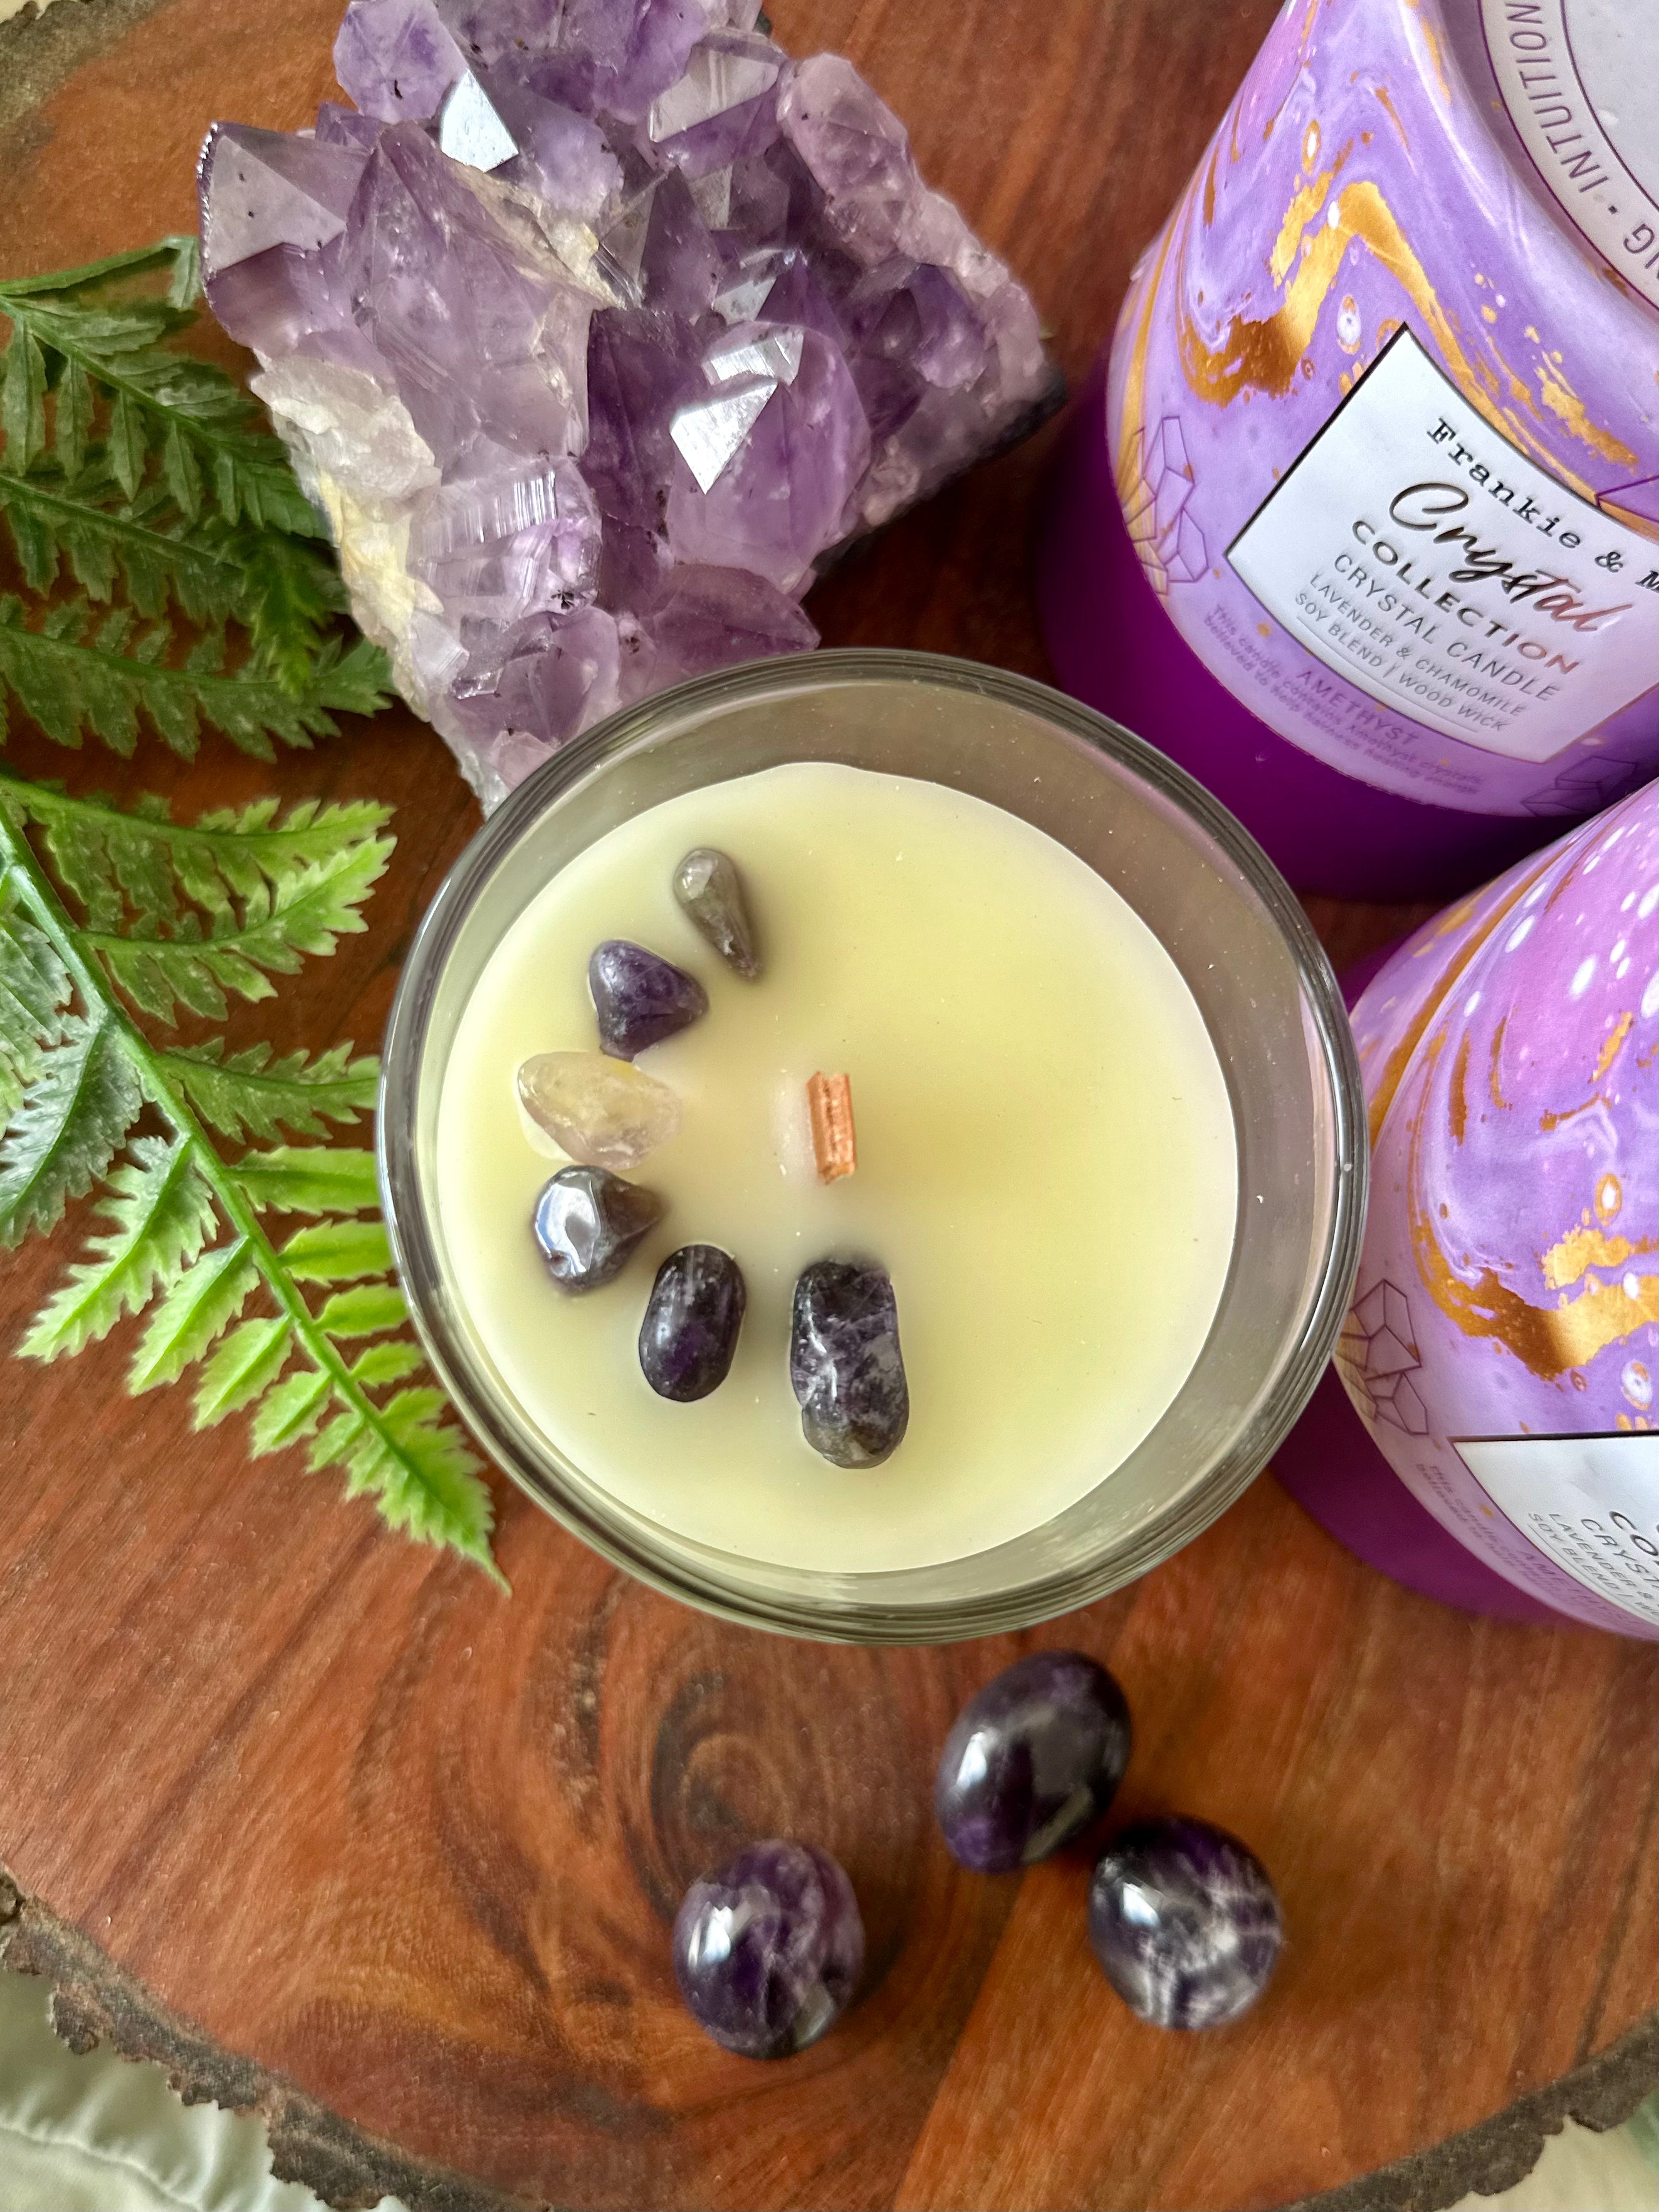 Amethyst Candle Small - Lavender and Chamomile - Muse Crystals & Mystical Gifts